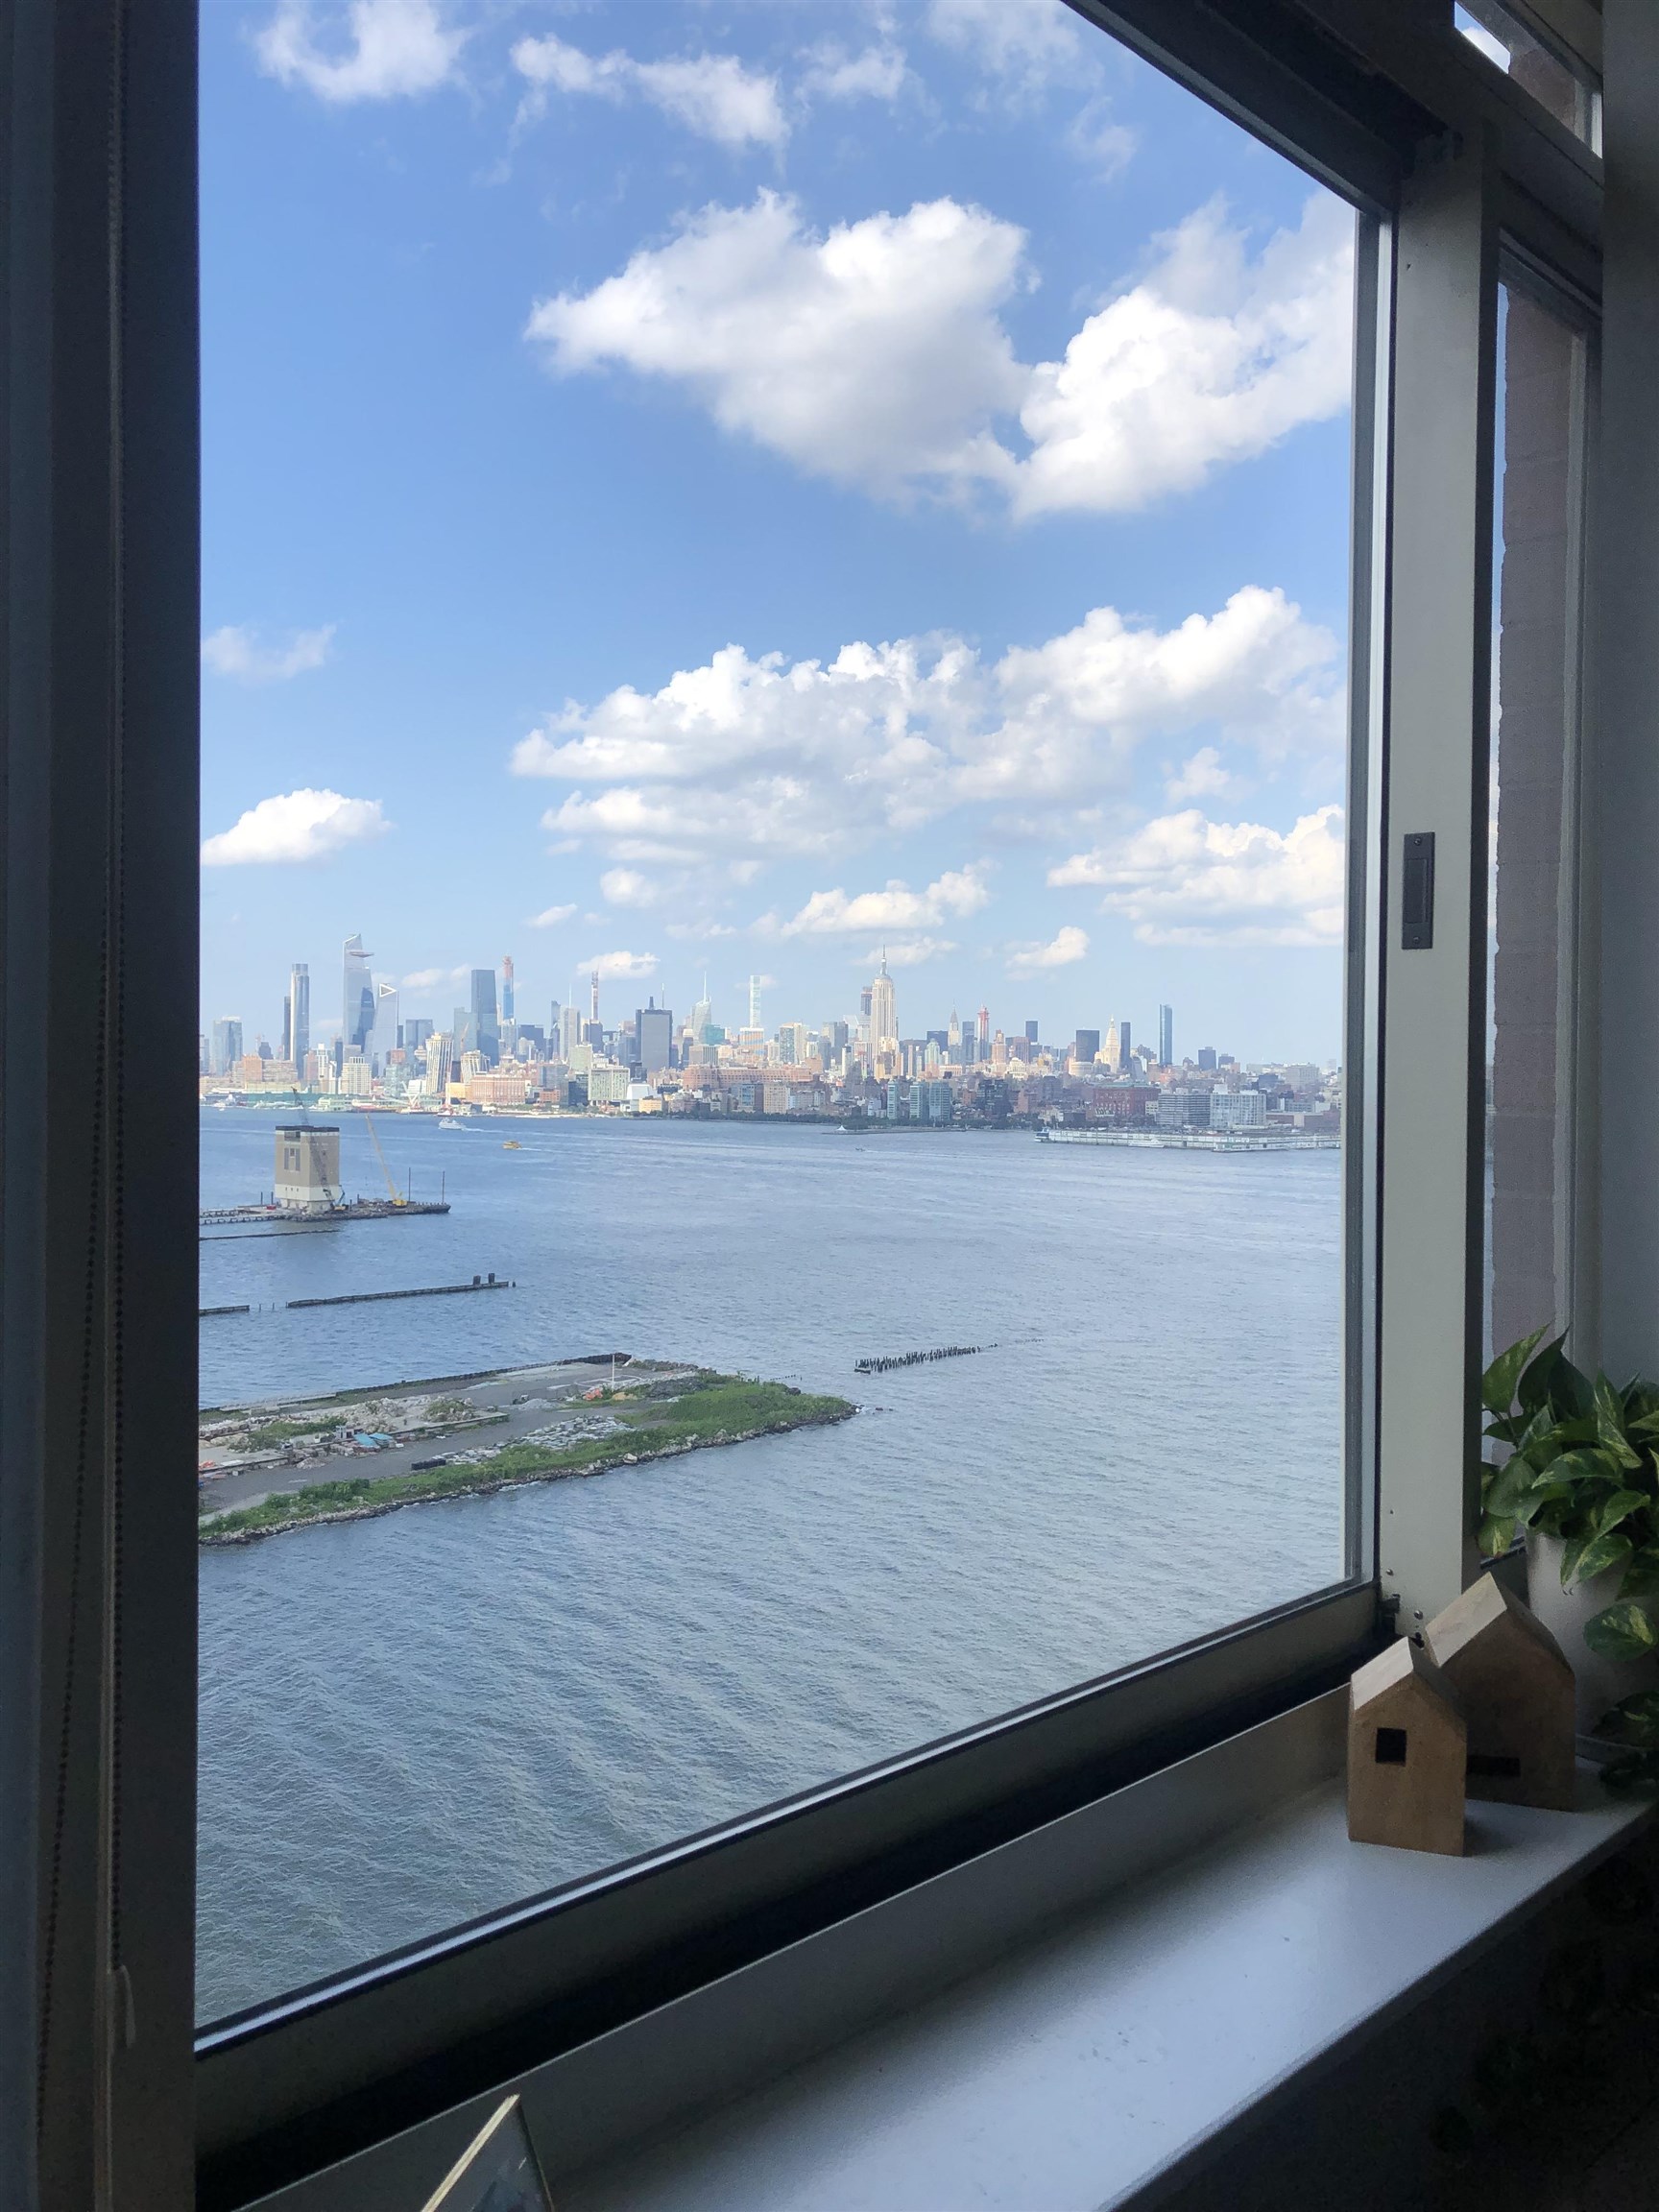 # 240004230 - For Rent in JERSEY CITY - Downtown NJ